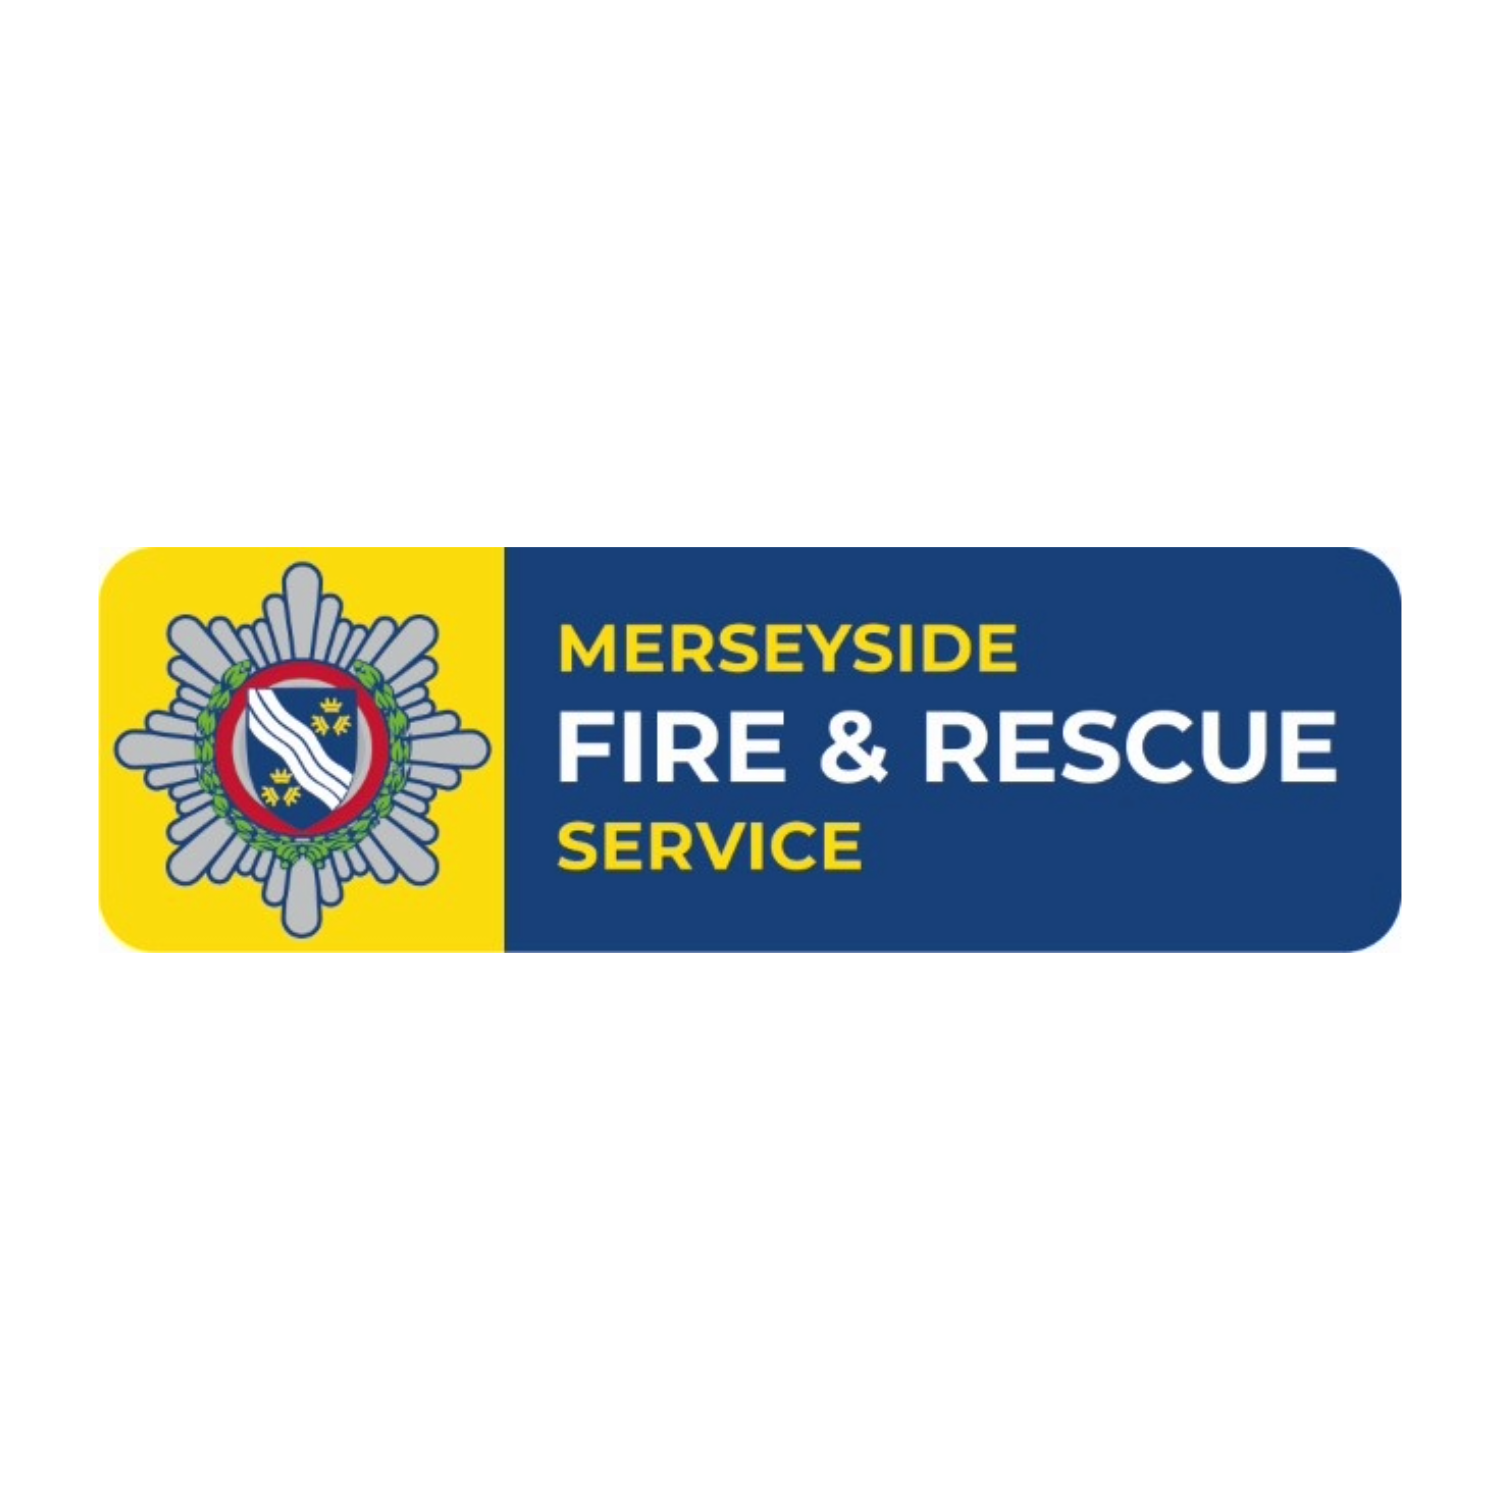 Merseyside Fire and Rescue Service logo